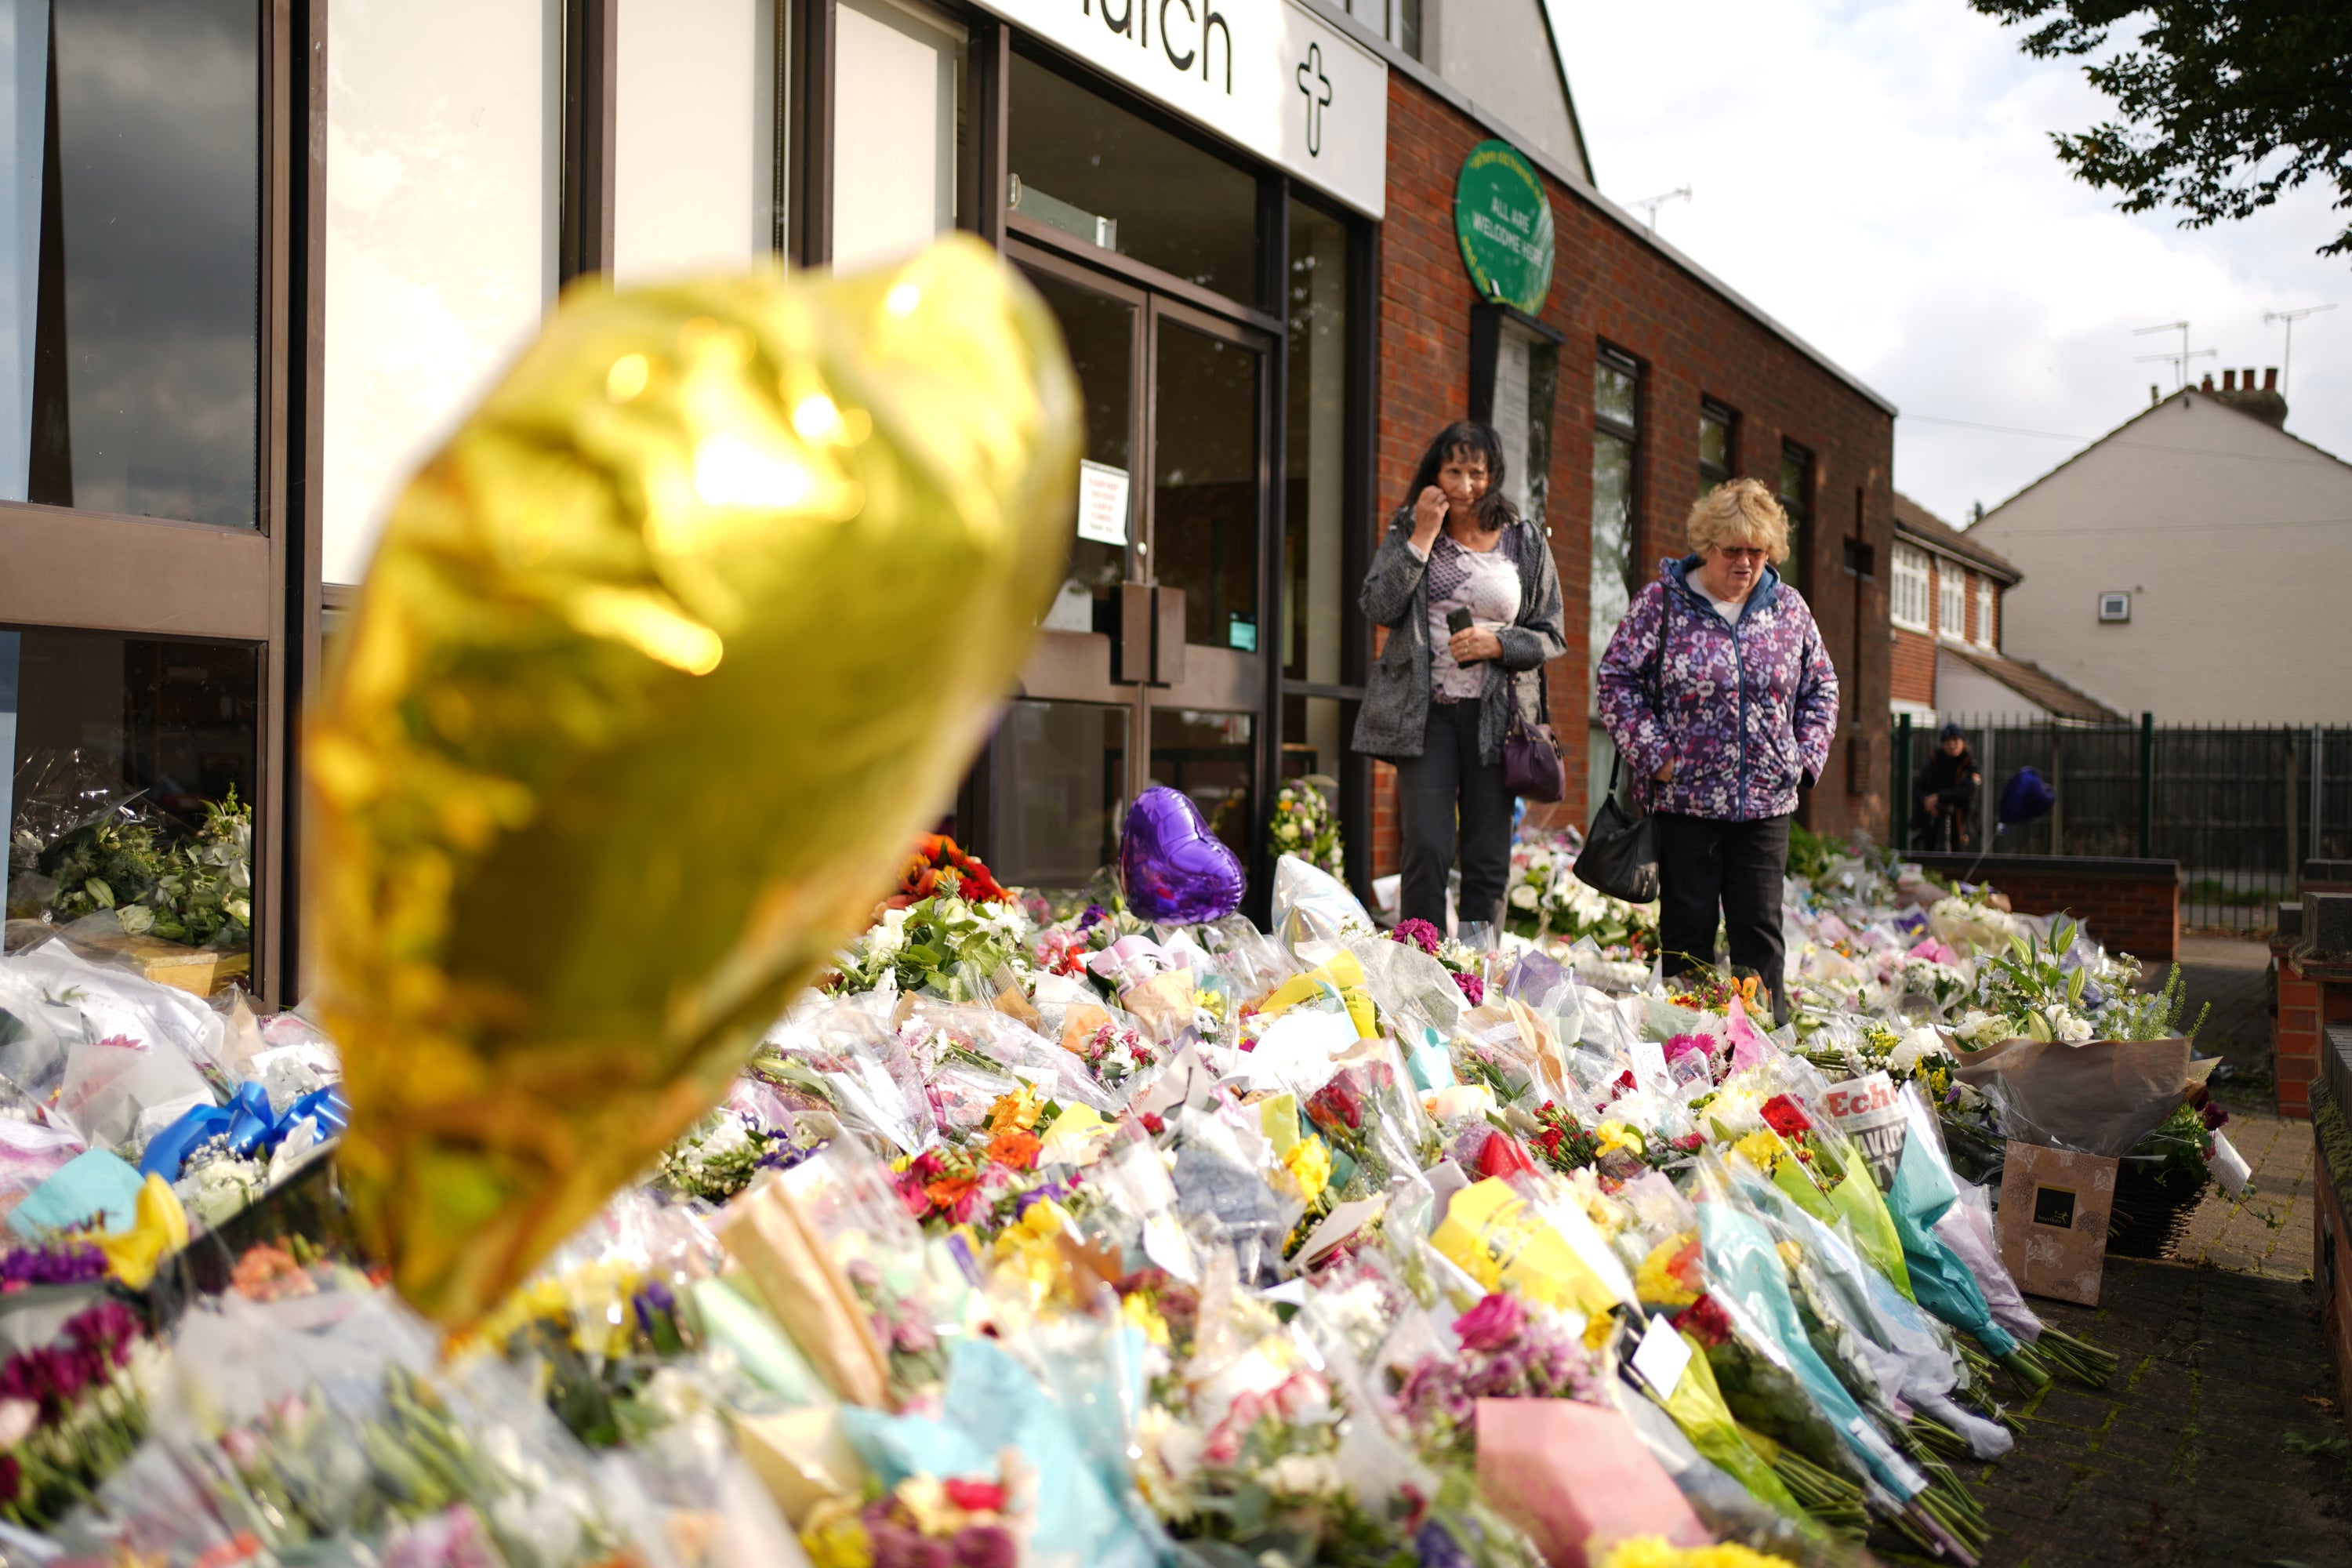 Tributes left outside Belfairs Methodist Church in Leigh-on-Sea, Essex, where Conservative MP Sir David Amess was killed (Joe Giddens/PA)